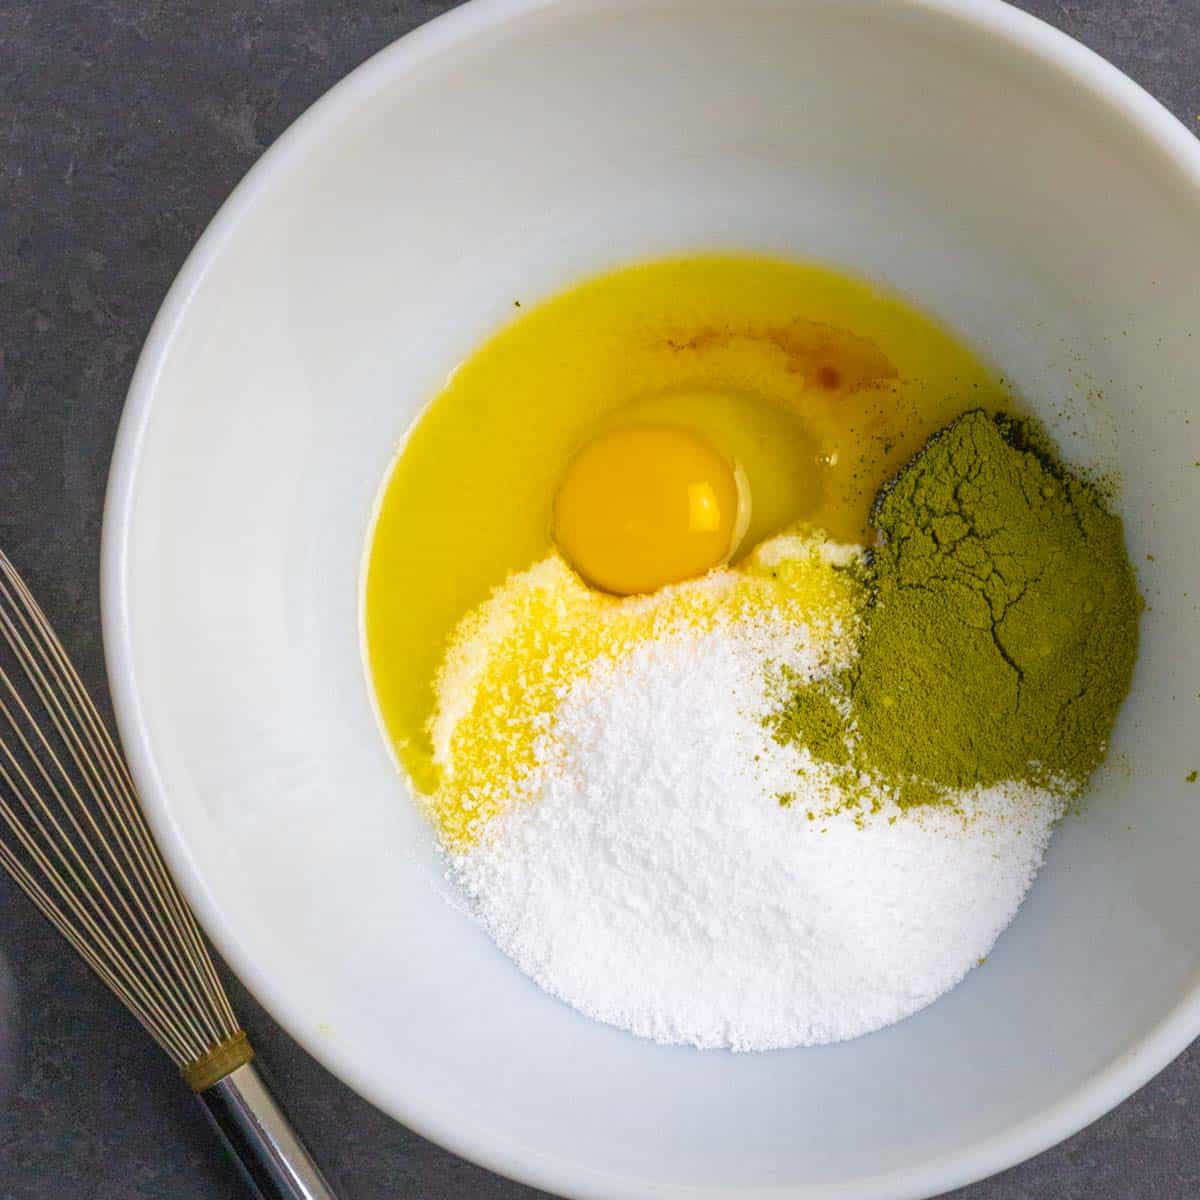 Egg, sweetener, vanilla and matcha added separately to a white mixing bowl with a metal whisk on the side.